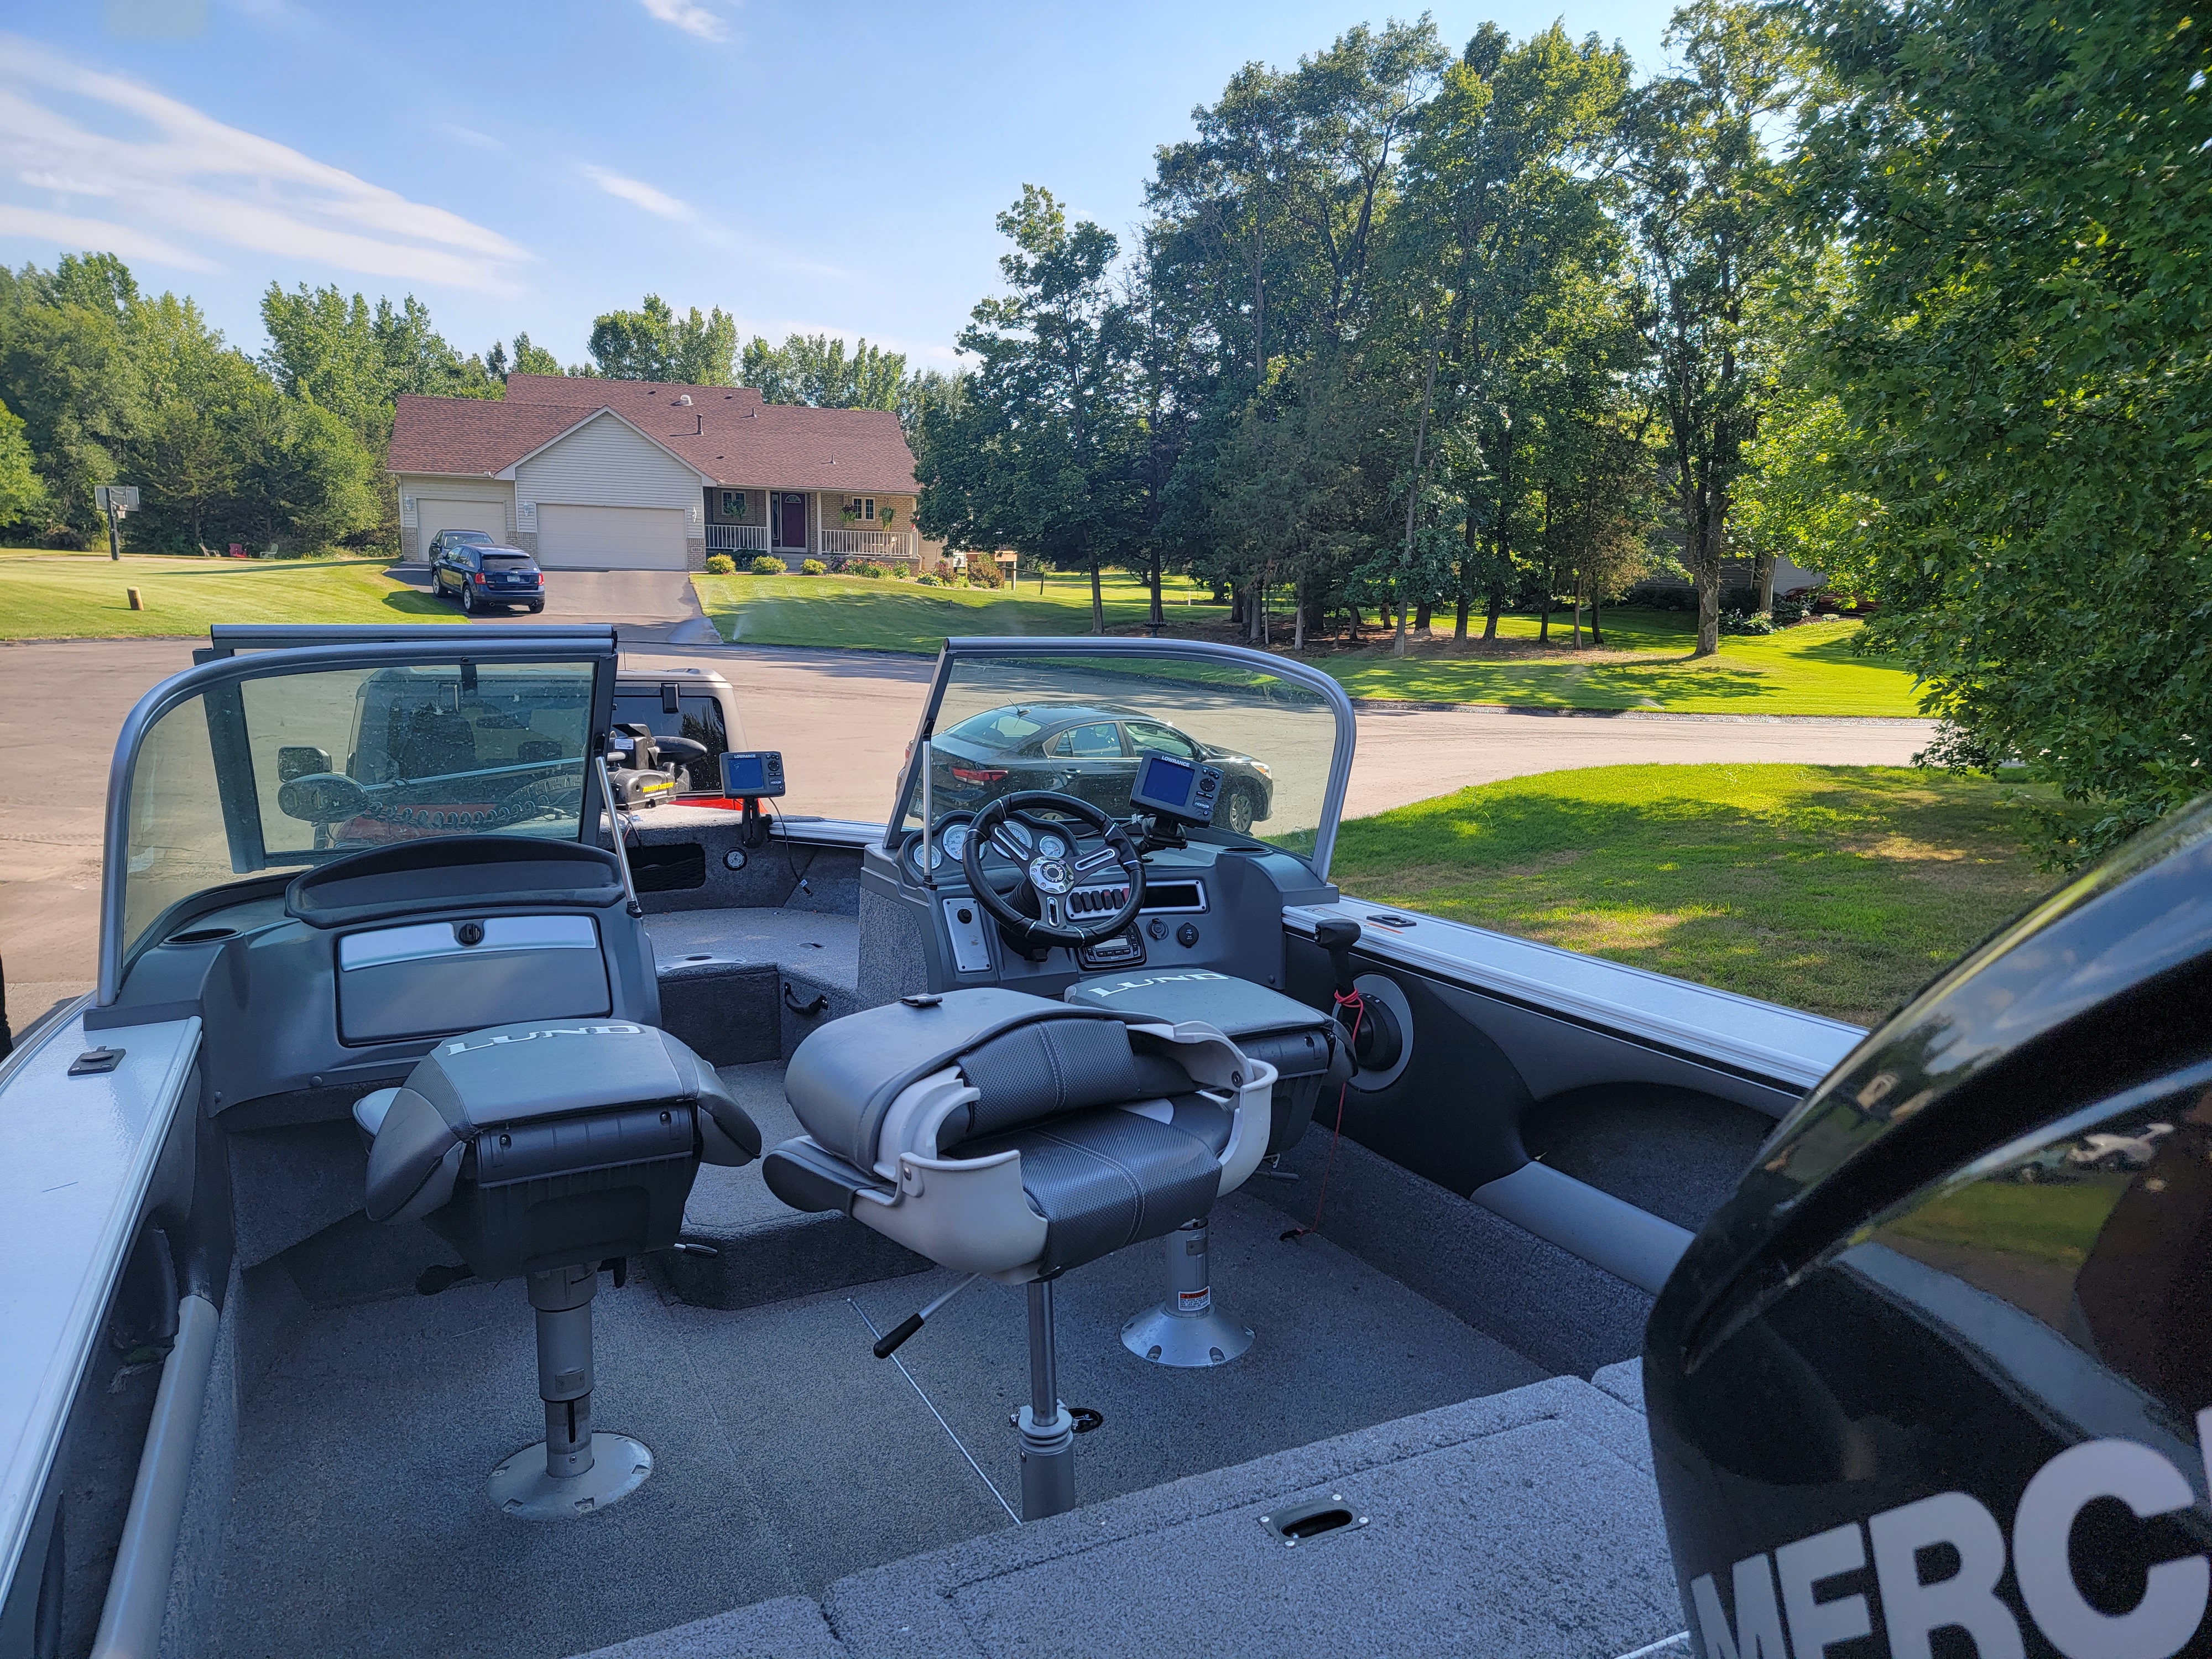 2017 Lund 1675 Crossover XS Fishing boat for sale in Anoka, MN - image 9 